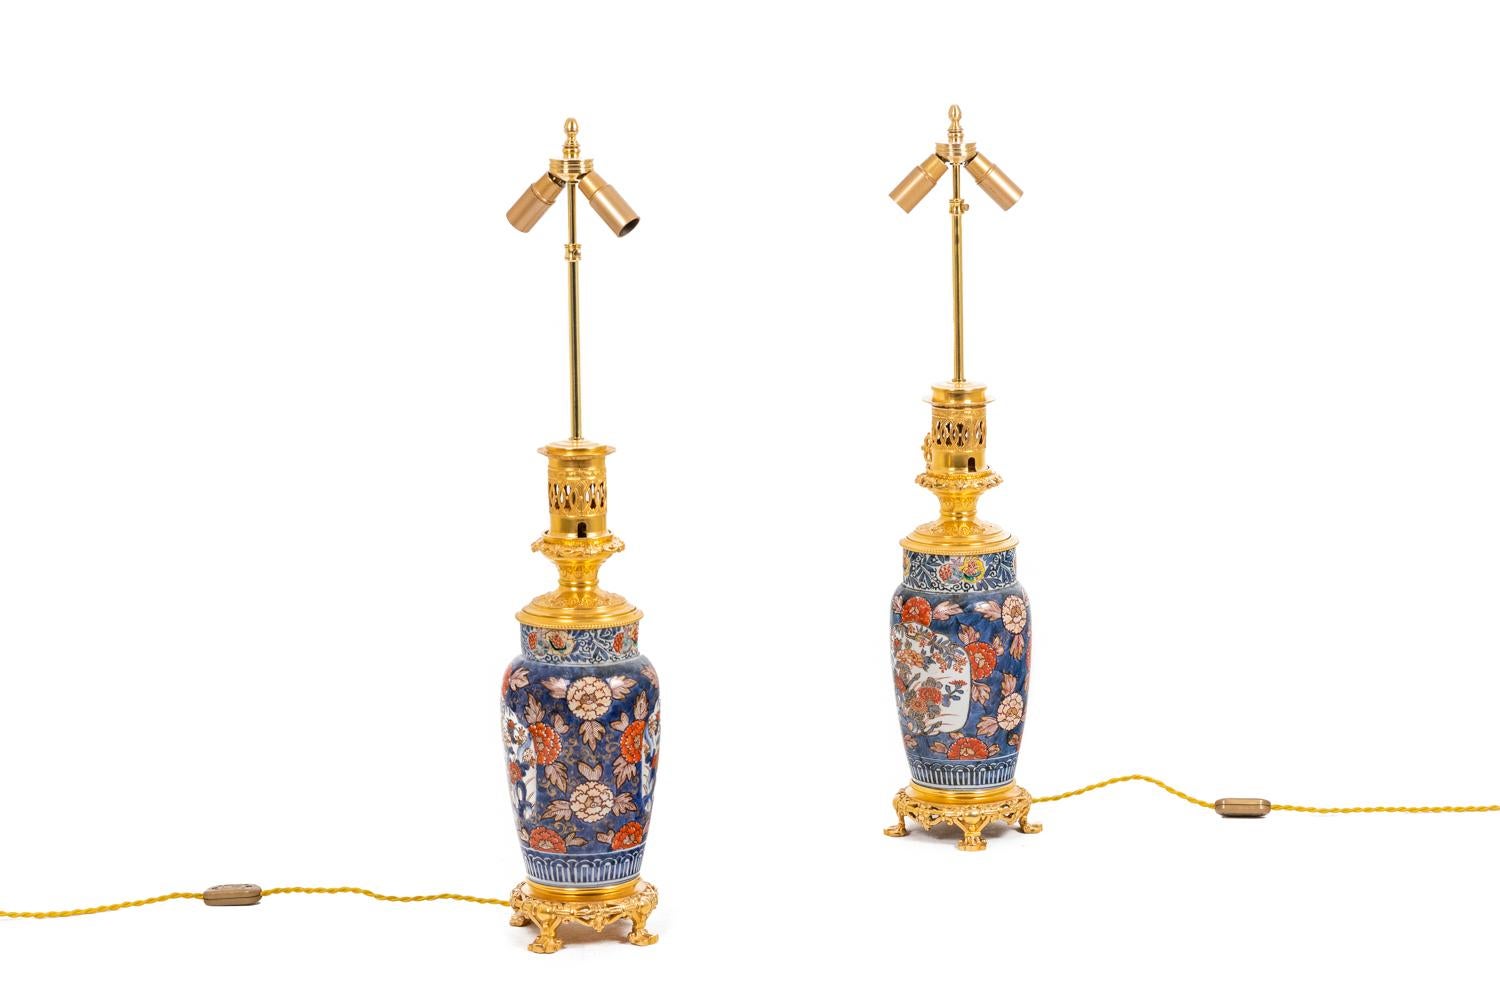 Pair of lamps in Imari porcelain with floral decor adorned with decorative bronze, ovoid shaped with neck. Frame in chiseled and gilt bronze standing on a circular quadripod base. Lamp body with blue background adorned with red flowers and blue